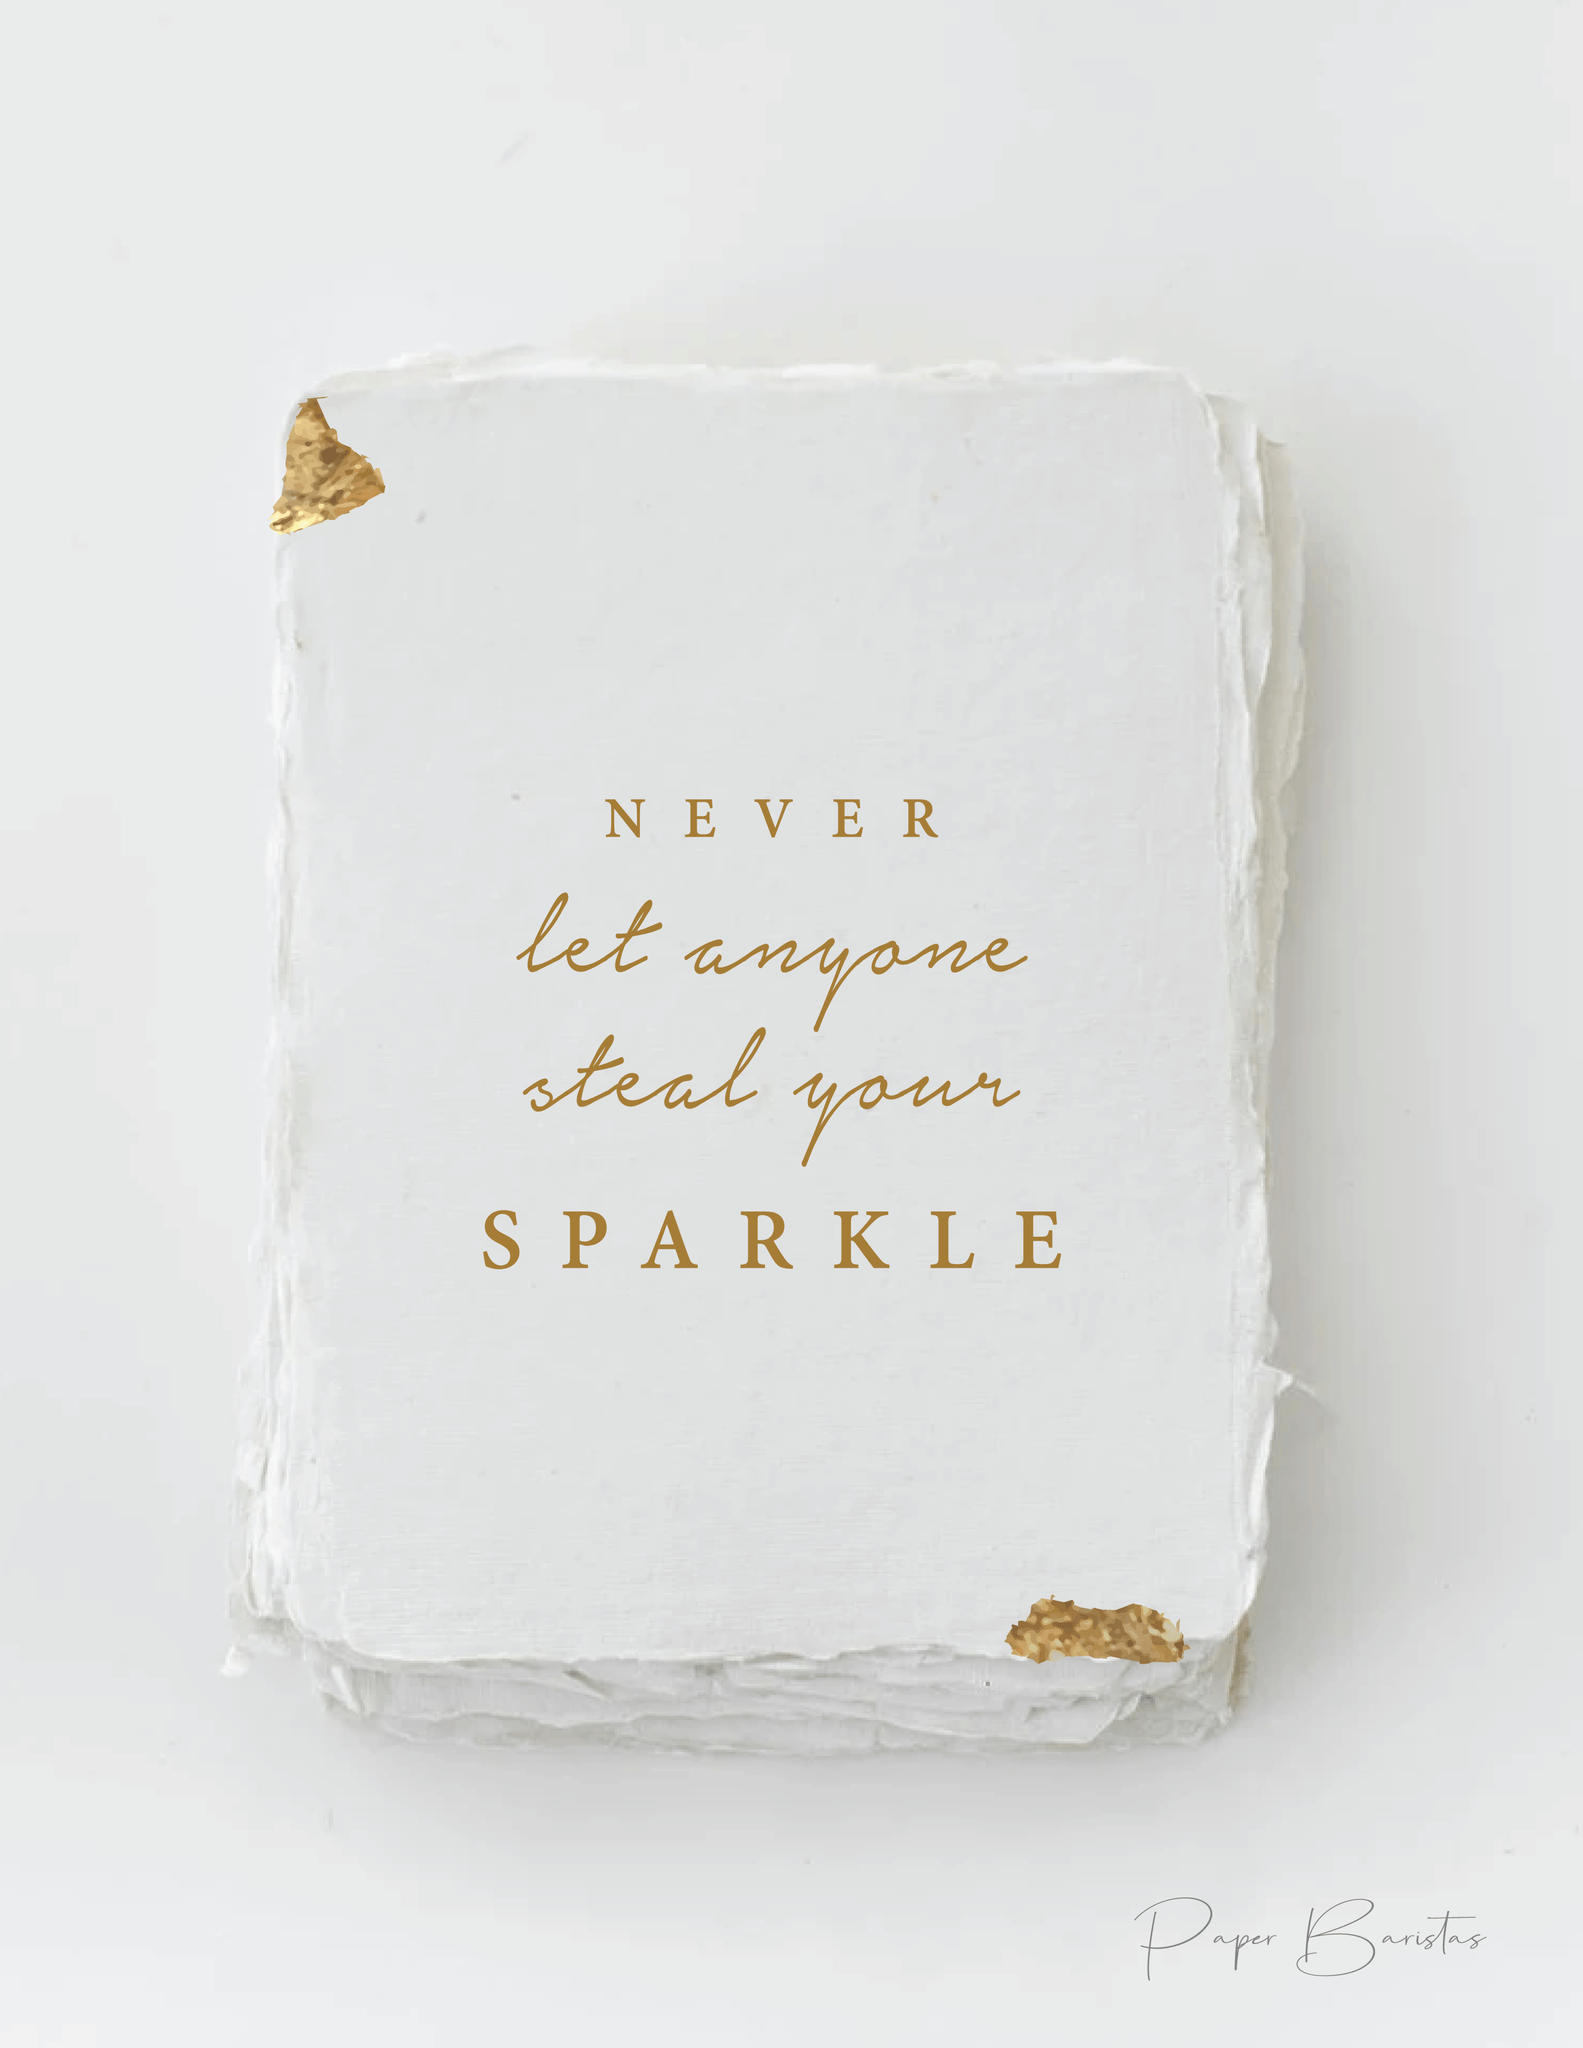 Paper Baristas "Never let anyone steal your sparkle" Greeting Card